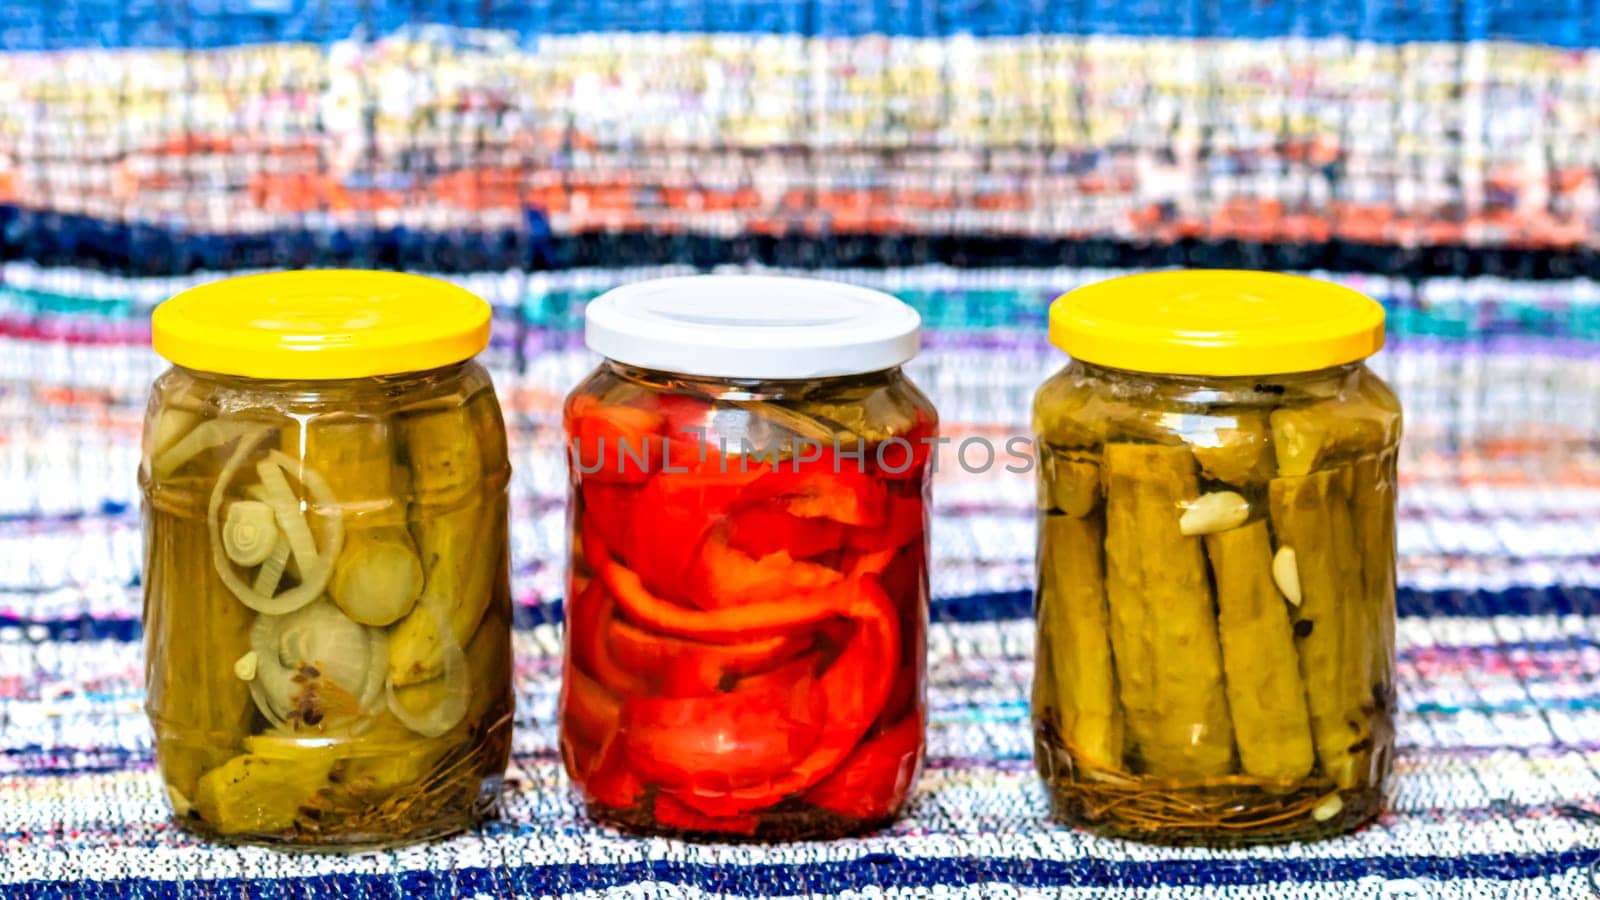  Glass jars with pickled red bell peppers and pickled cucumbers (pickles) isolated. Jars with variety of pickled vegetables. Preserved food concept in a rustic composition. by vladispas